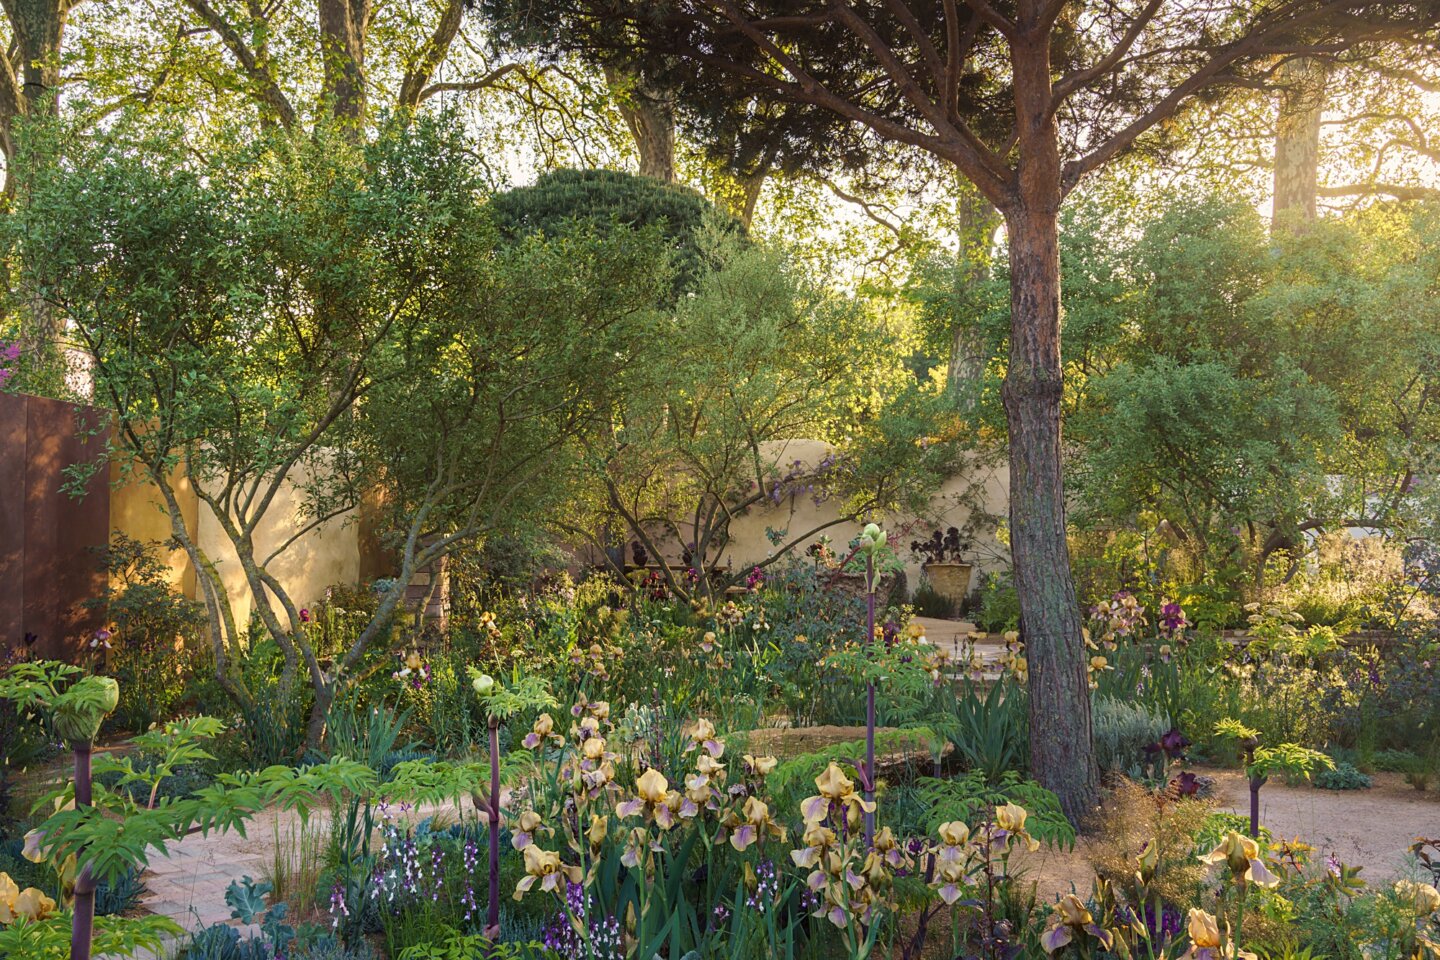 The Nurture Landscapes garden designed by Sarah Price with early sunlight on the Benton irises